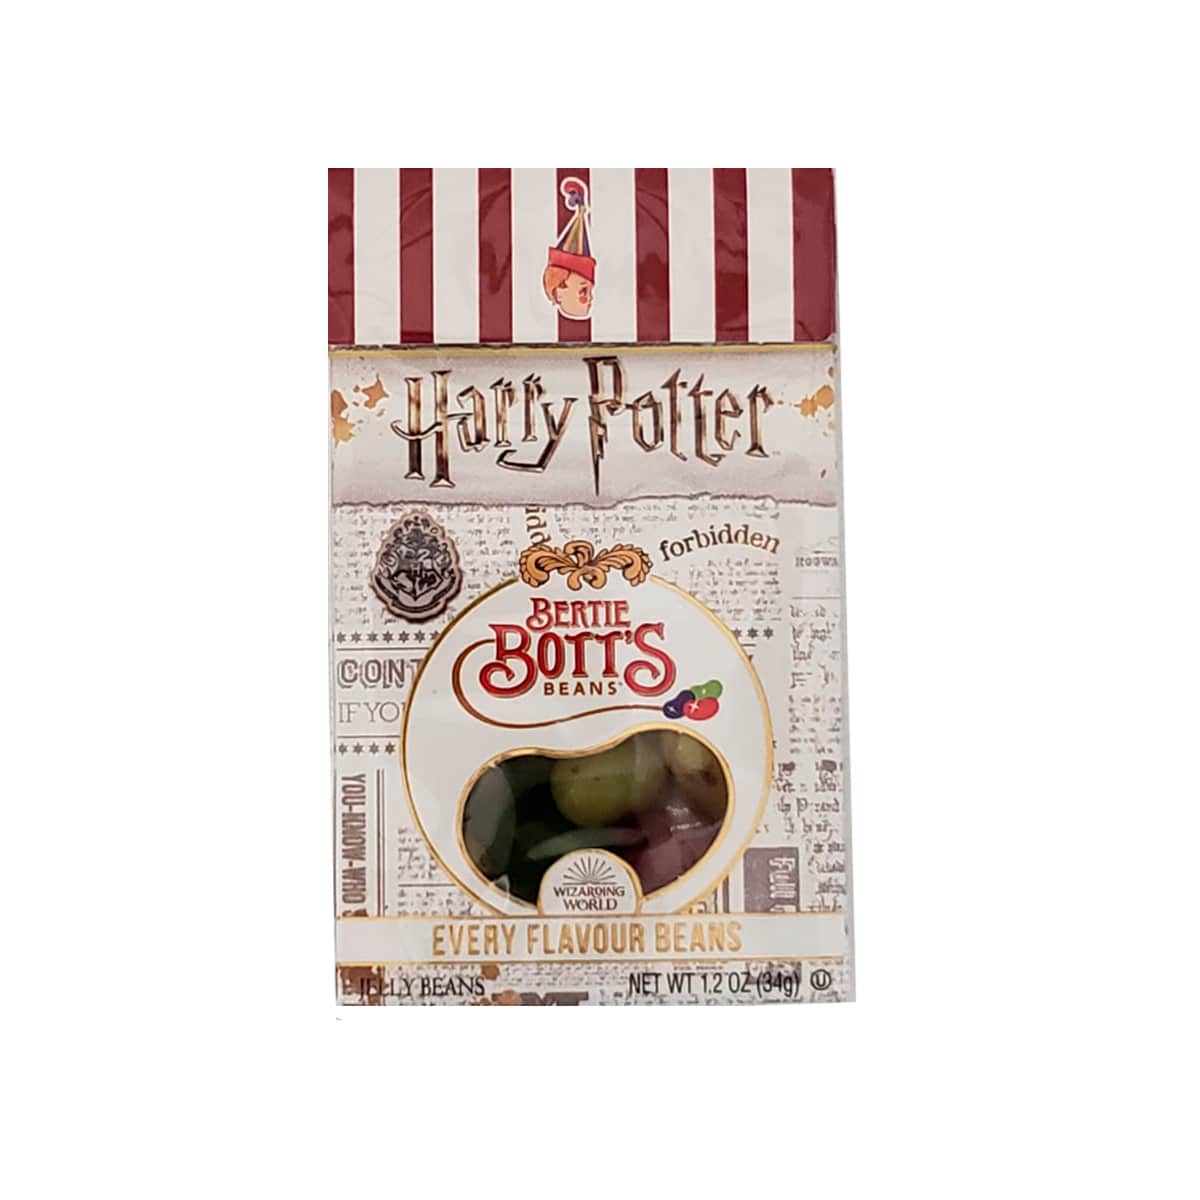 JELLY BELLY HARRY POTTER SABORES SURTIDOS 1.2 OZ